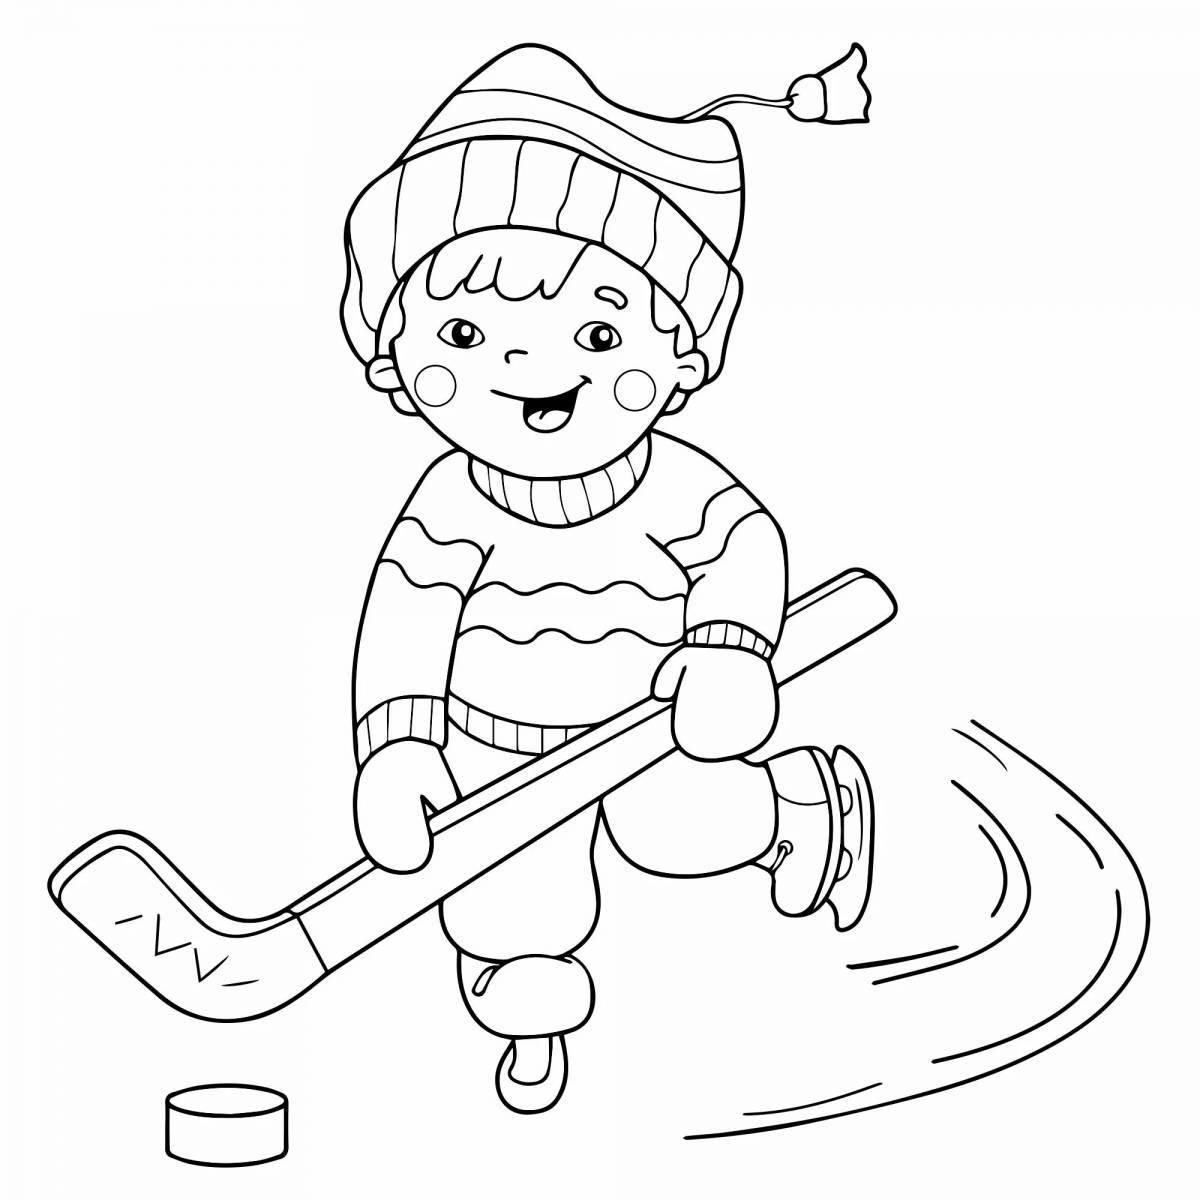 Amazing dhow winter sports coloring book